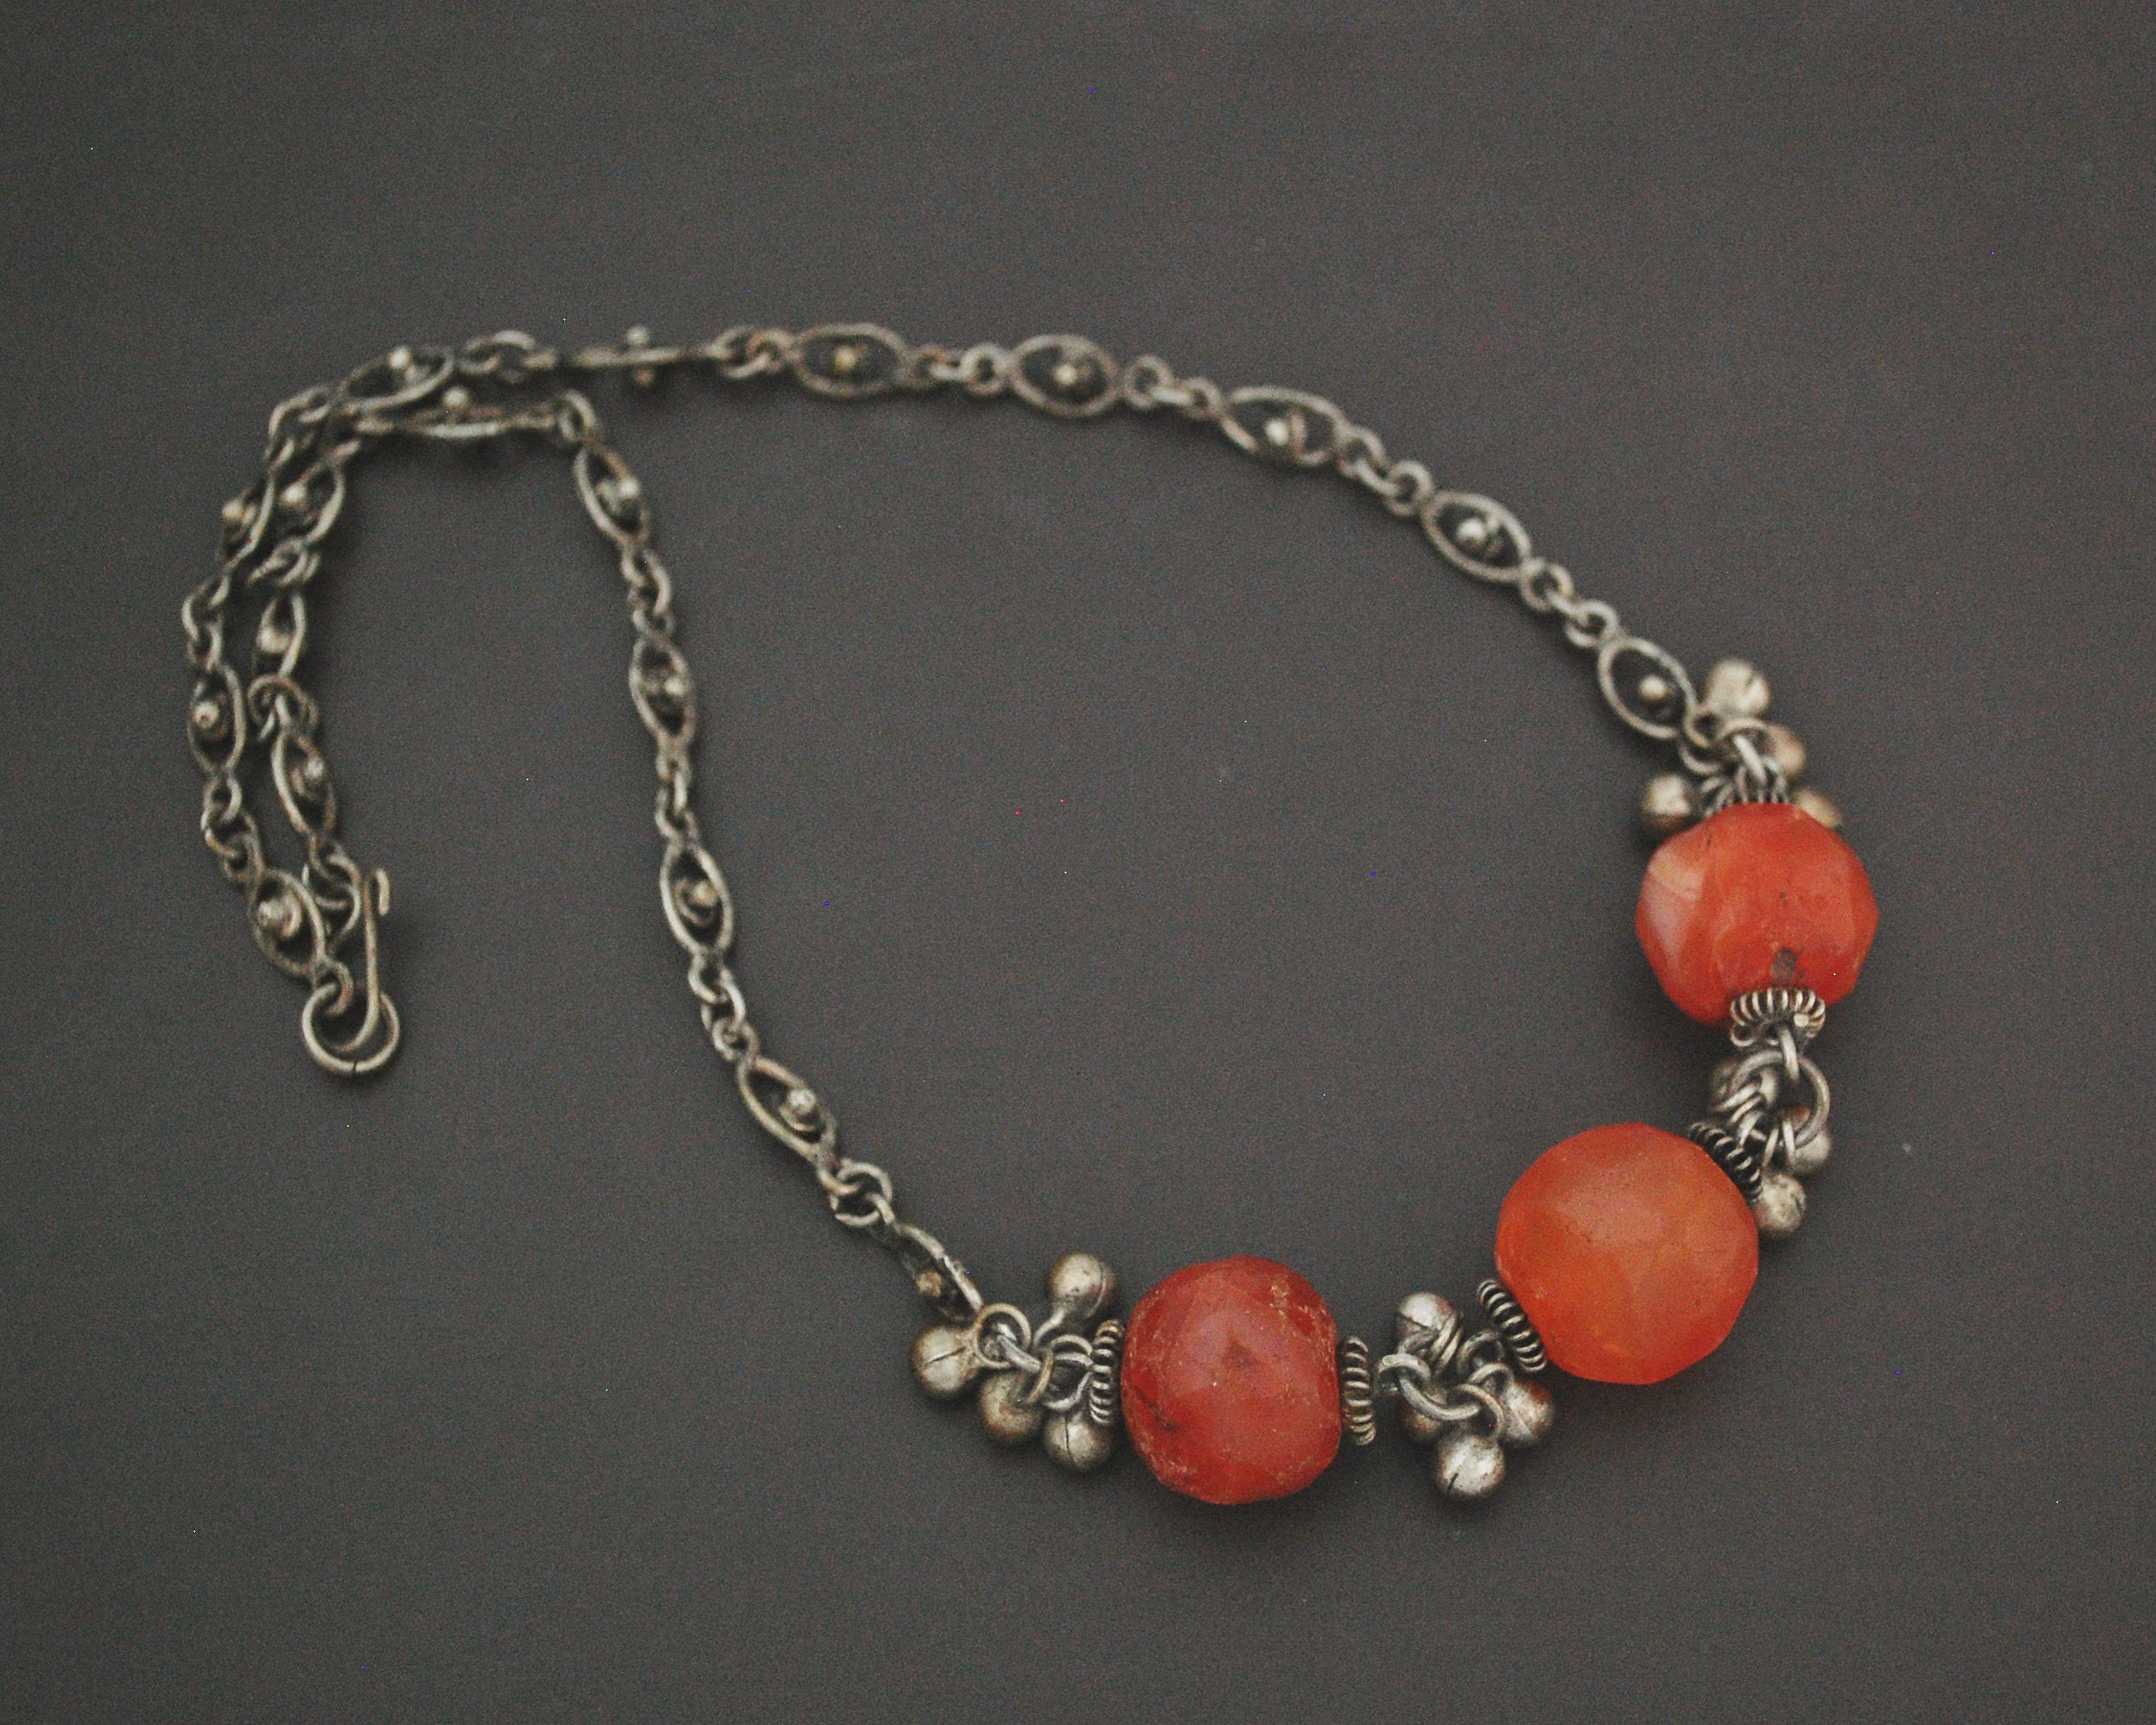 Indian Silver and Carnelian Beads Necklace